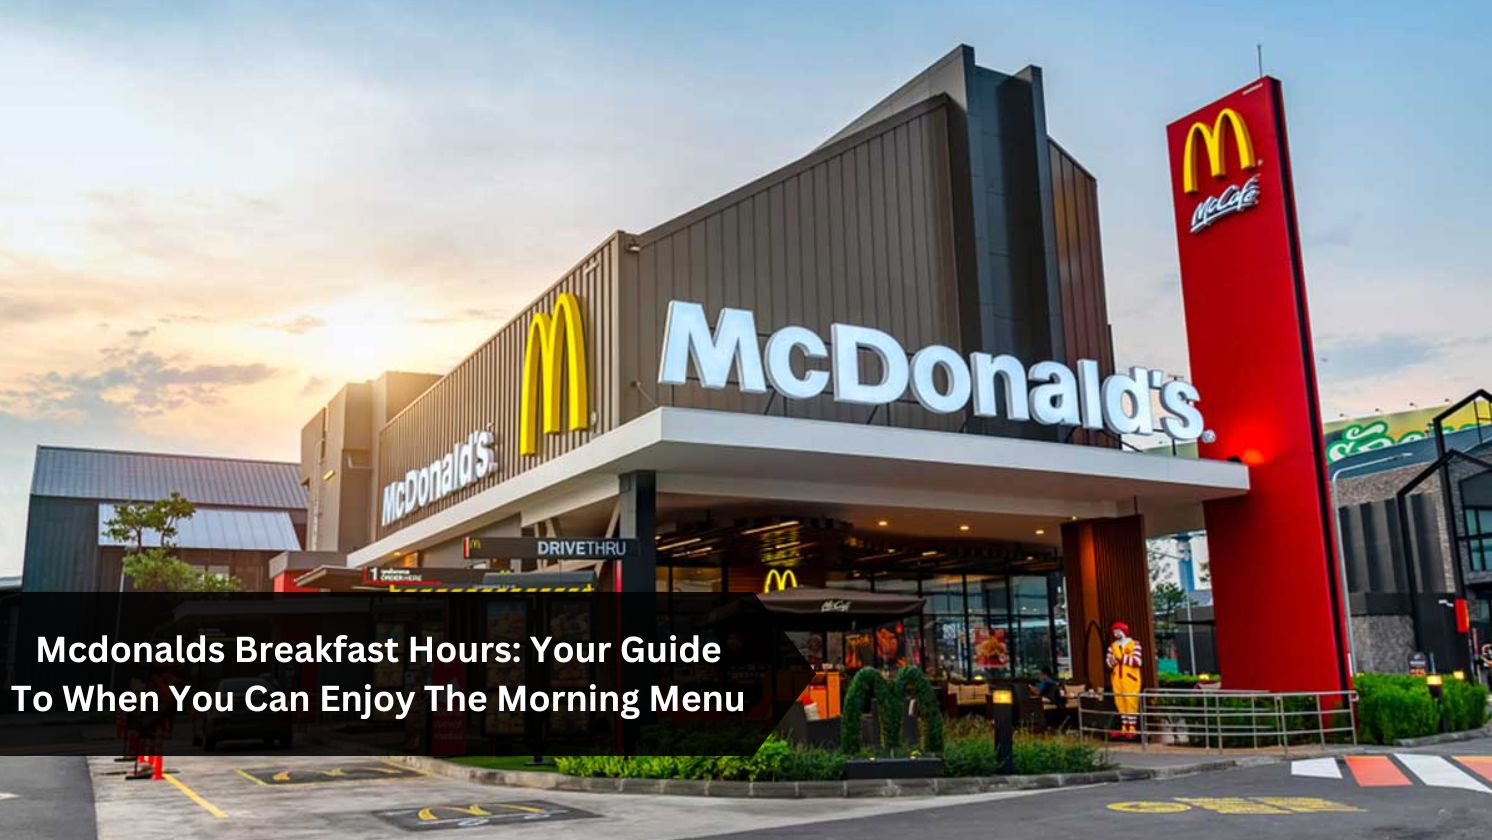 Mcdonalds-Breakfast-Hours-Your-Guide-To-When-You-Can-Enjoy-The-Morning-Menu